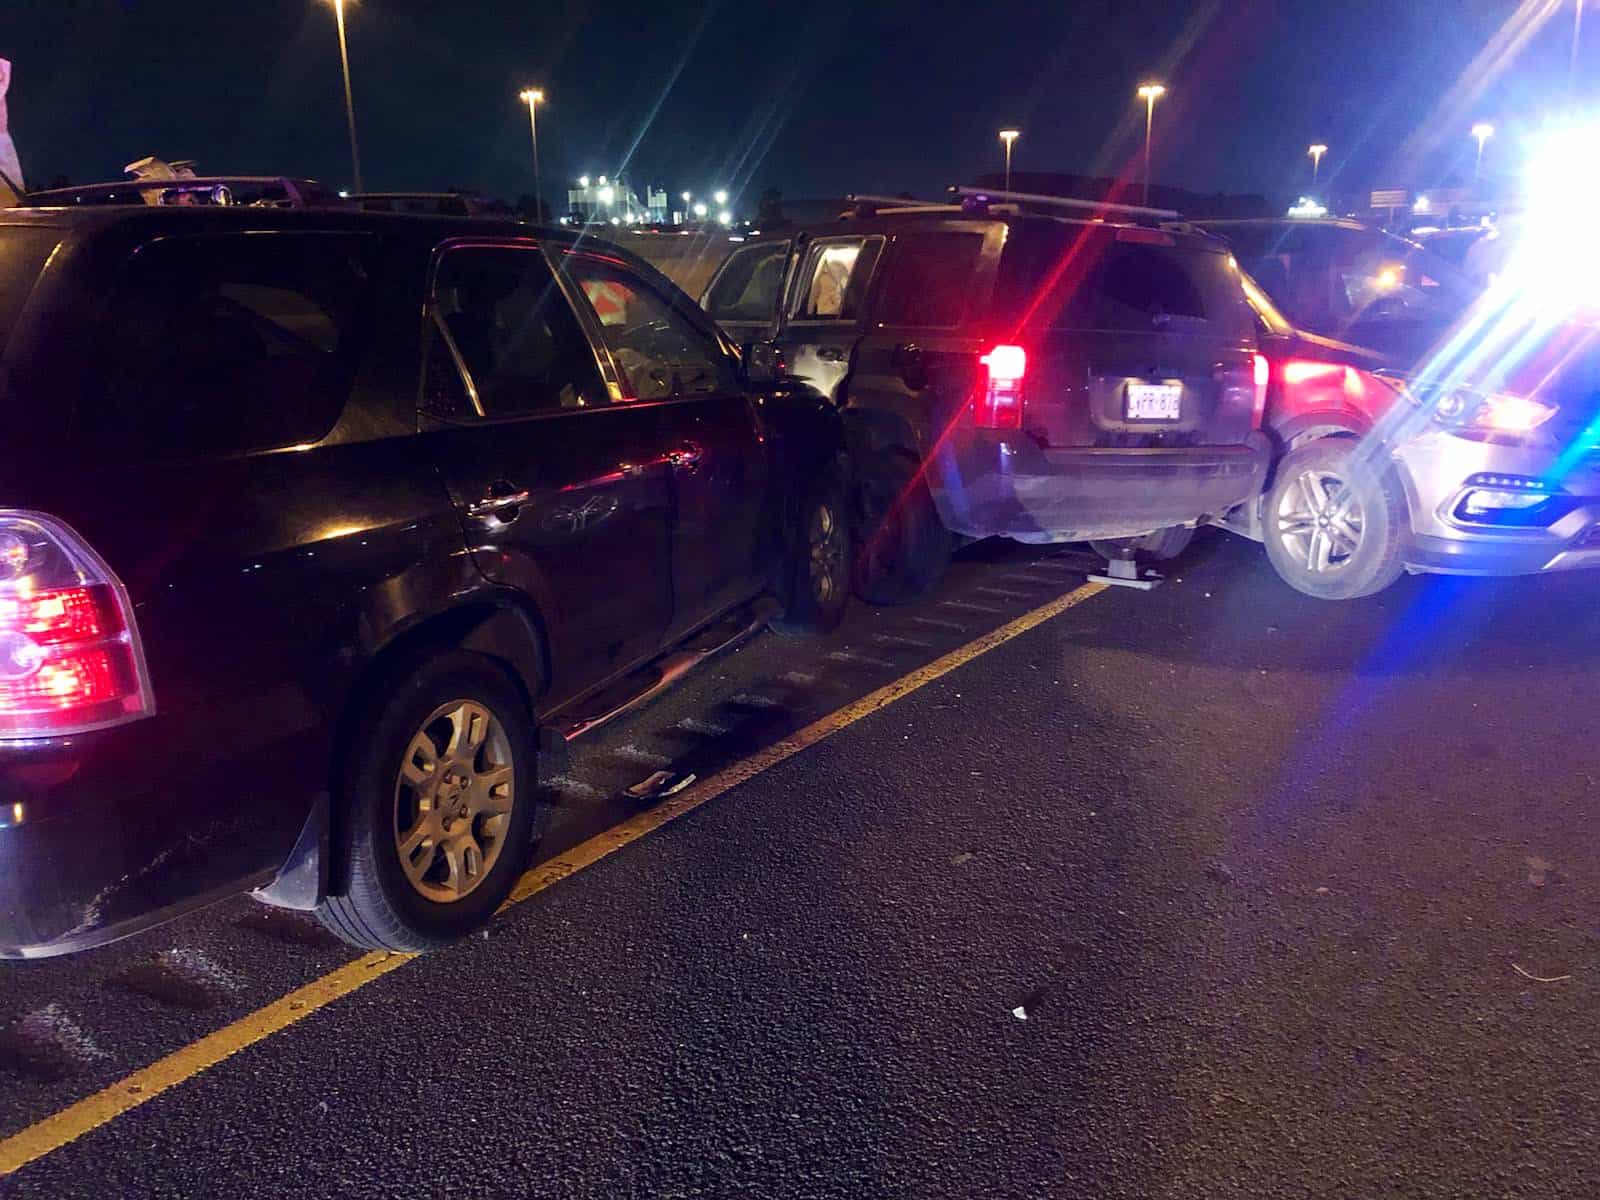 4 vehicle collision on highway caused by impaired driver in Mississauga